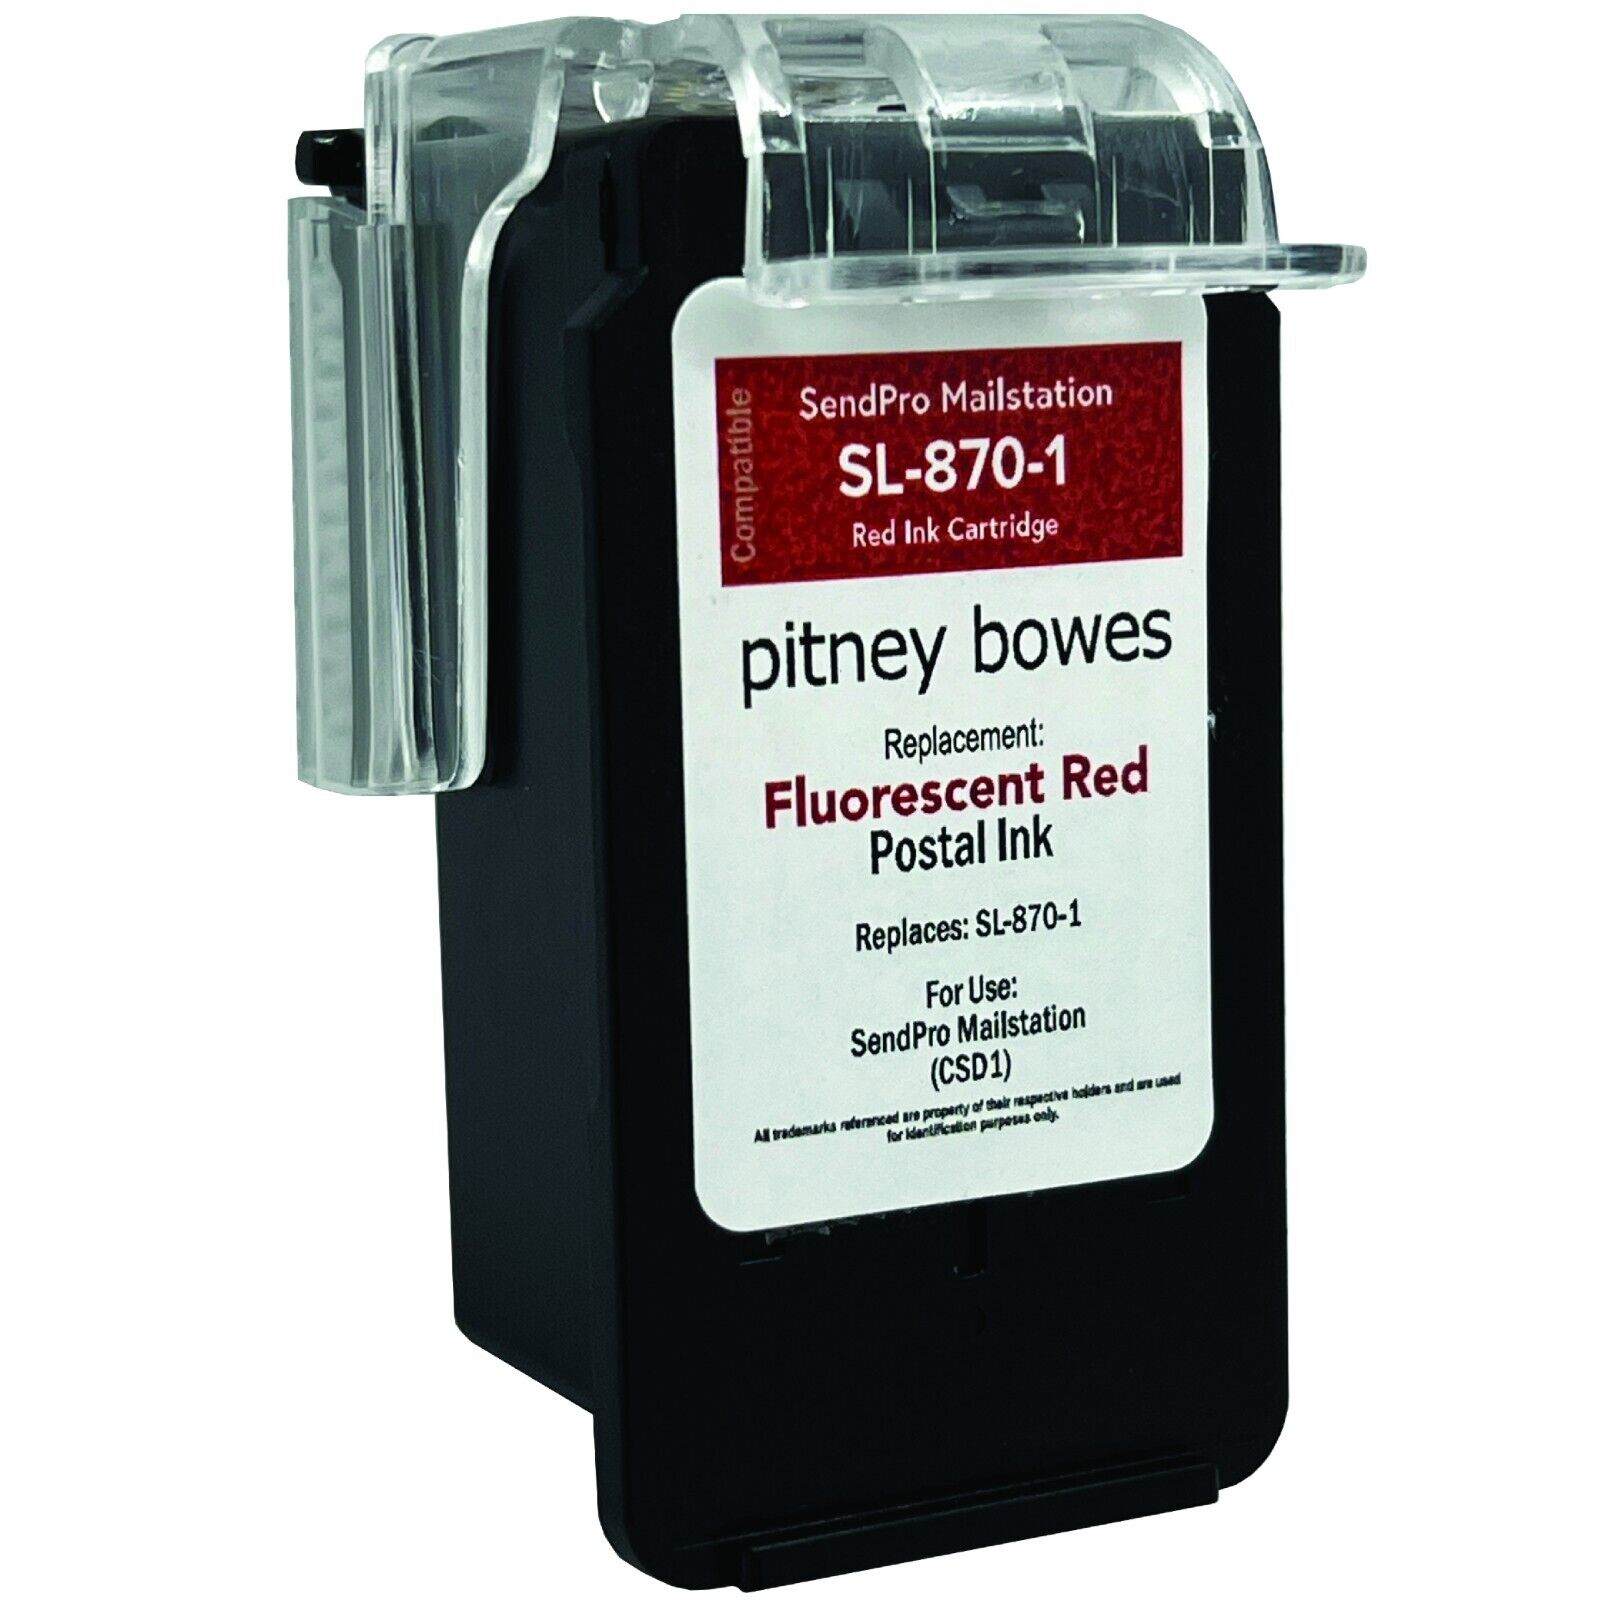 Pitney Bowes SL-870-1 Red Ink Cartridge replacement for the SendPro Mailstation